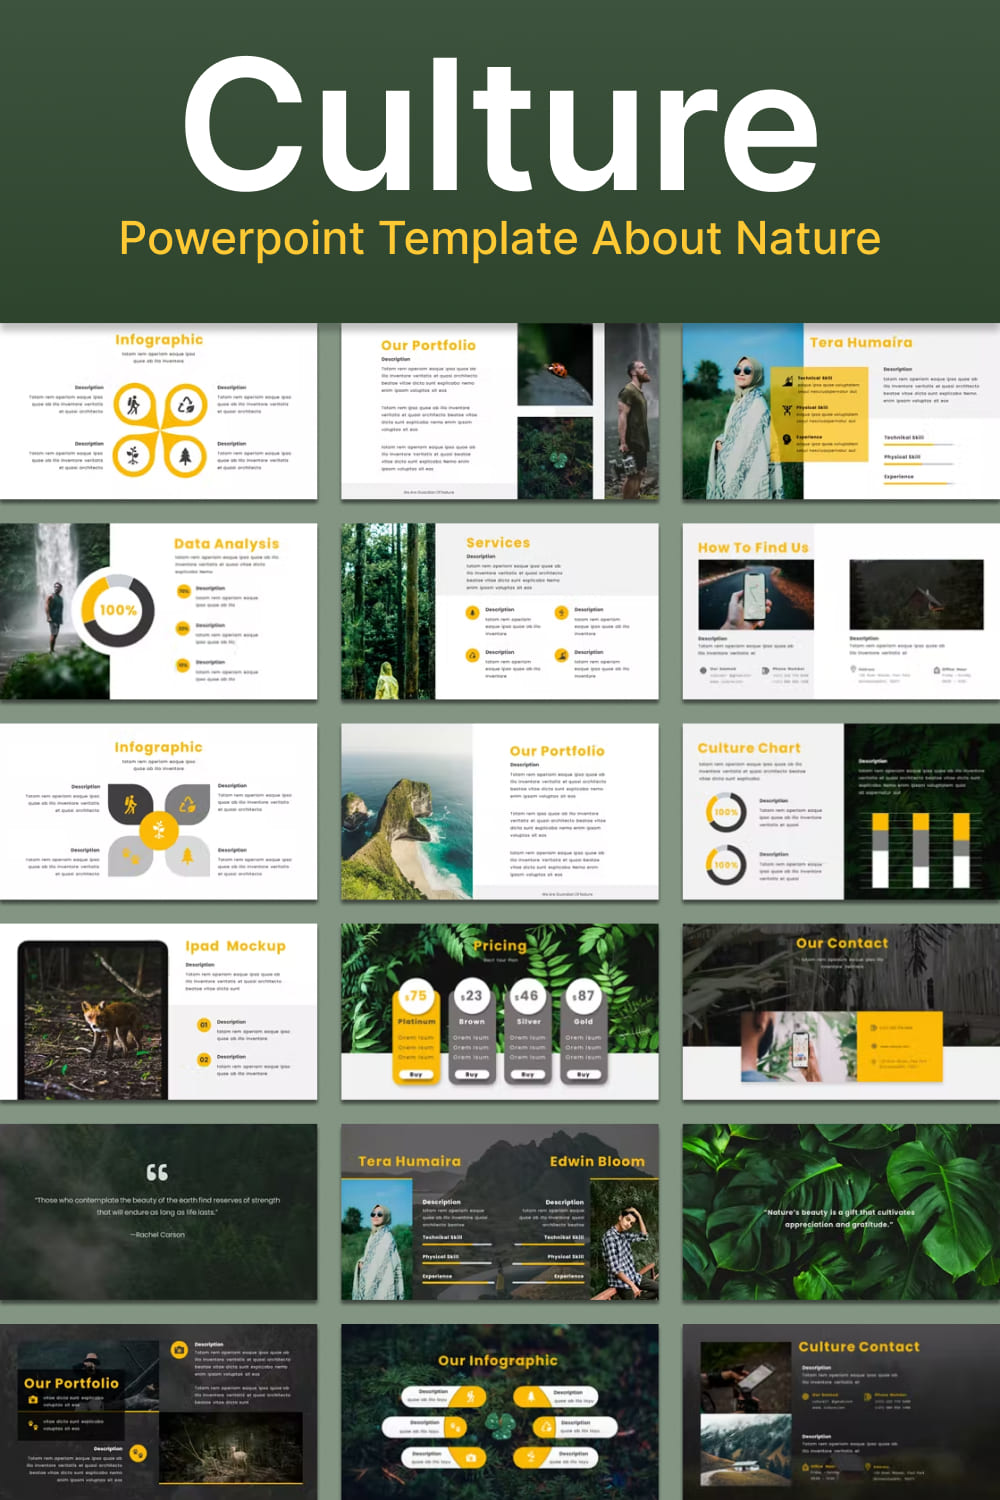 Culture powerpoint template about nature - pinterest image preview.